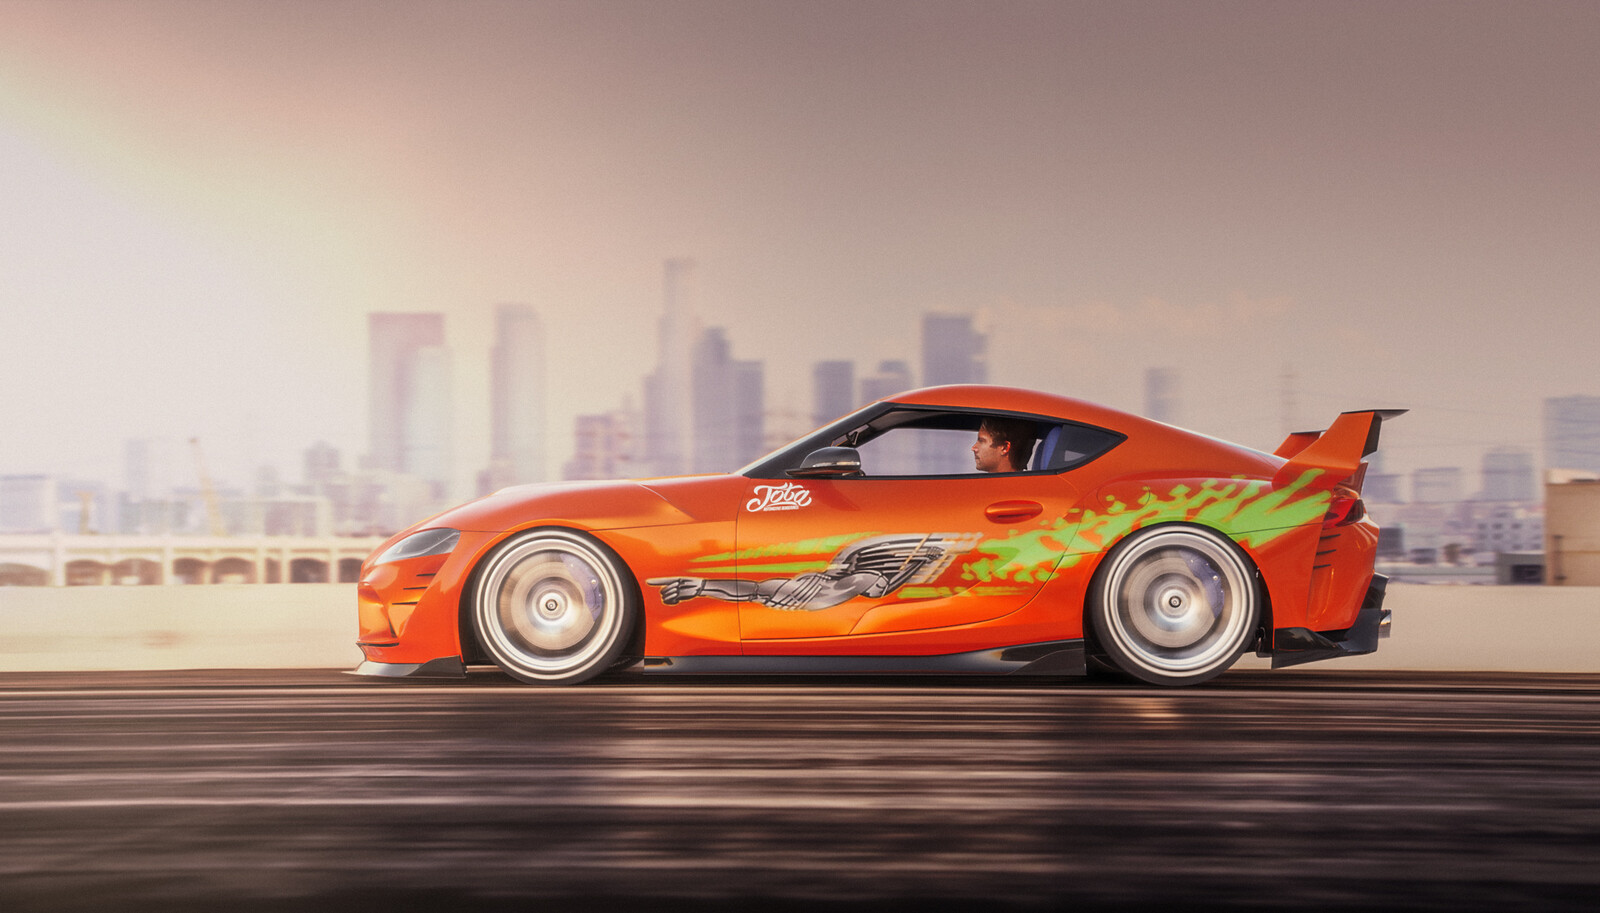 Paul Walker driving a homage to the classic Toyota Supra from the Fast and Furious movies.